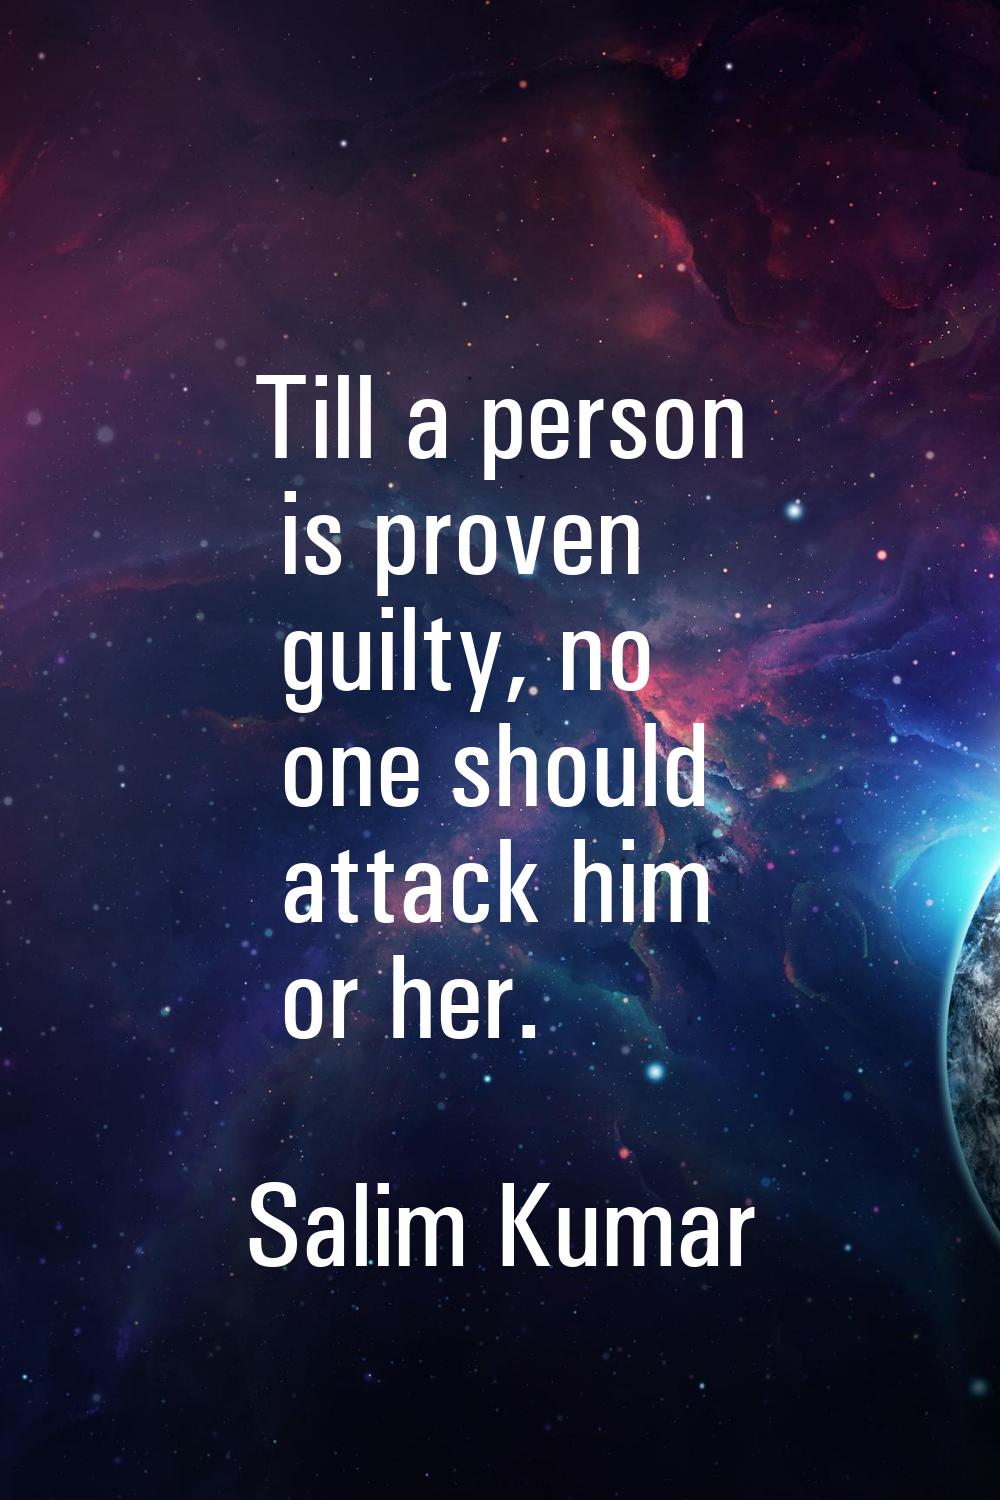 Till a person is proven guilty, no one should attack him or her.